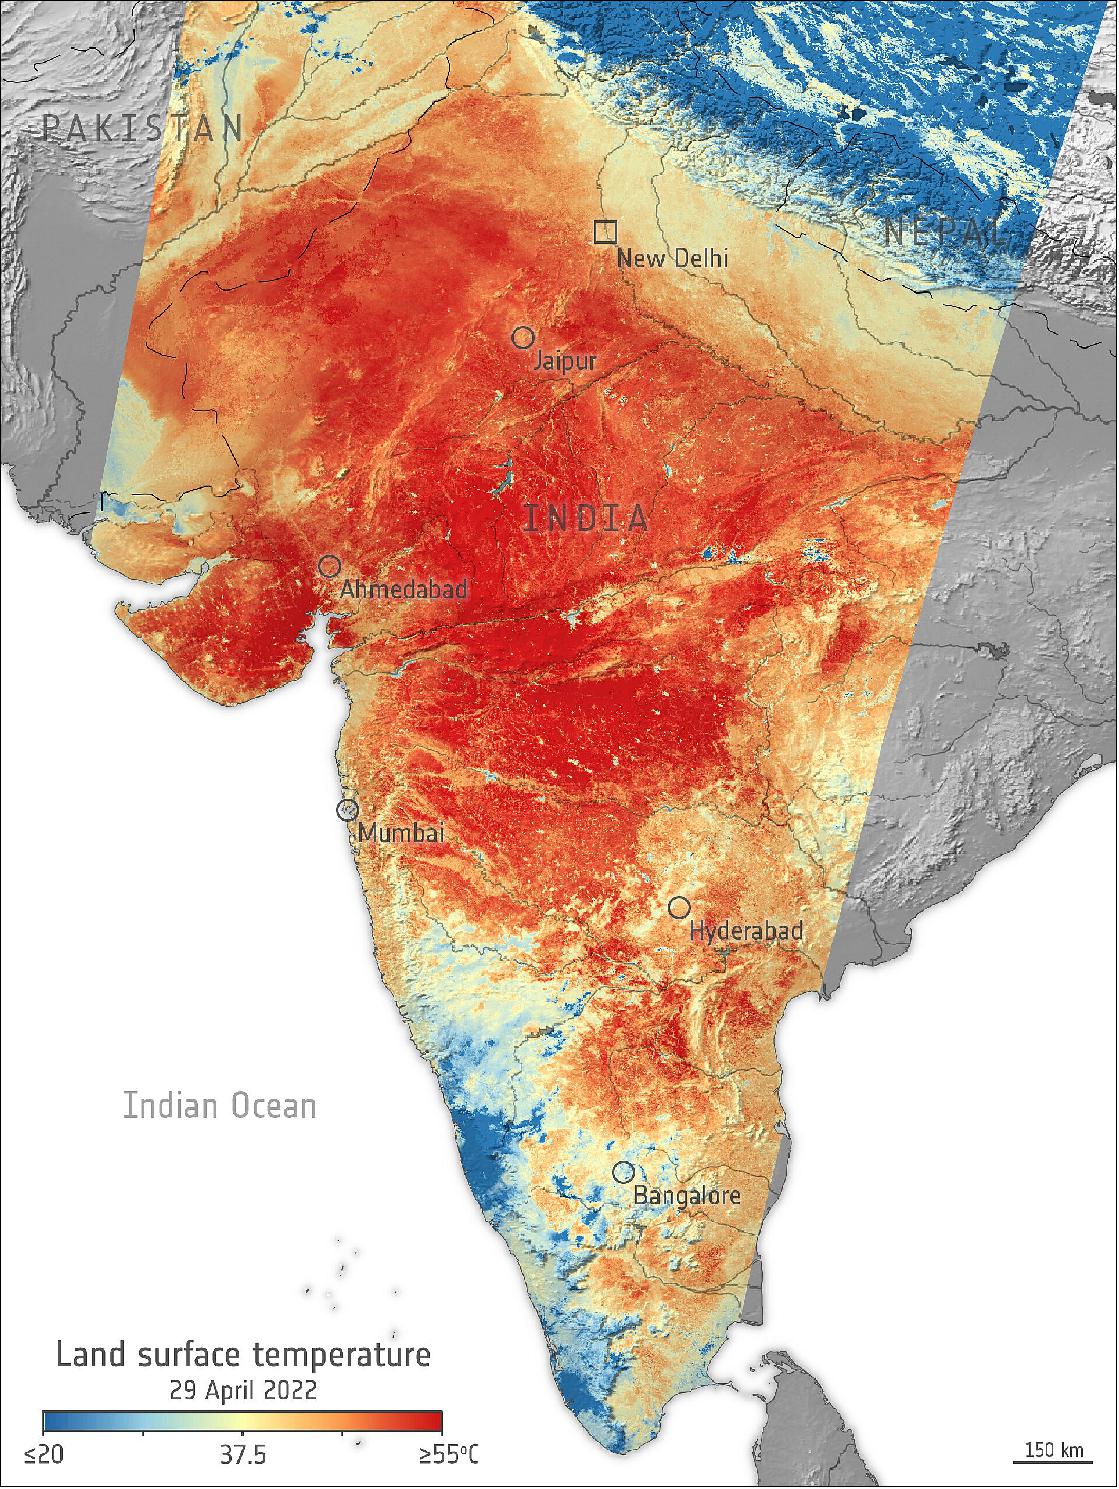 Figure 19: India is currently facing a prolonged heatwave, with temperatures exceeding 42°C in numerous cities across the country. The map was generated by using the mission’s Sea and Land Surface Temperature Radiometer instrument. While weather forecasts use predicted air temperatures, this satellite instrument measures the real amount of energy radiating from Earth. Therefore, the map shows the actual temperature of the land’s surface pictured here, which is usually significantly hotter than air temperatures(image credit: ESA, the image contains modified Copernicus Sentinel data (2022), processed by ESA, CC BY-SA 3.0 IGO )